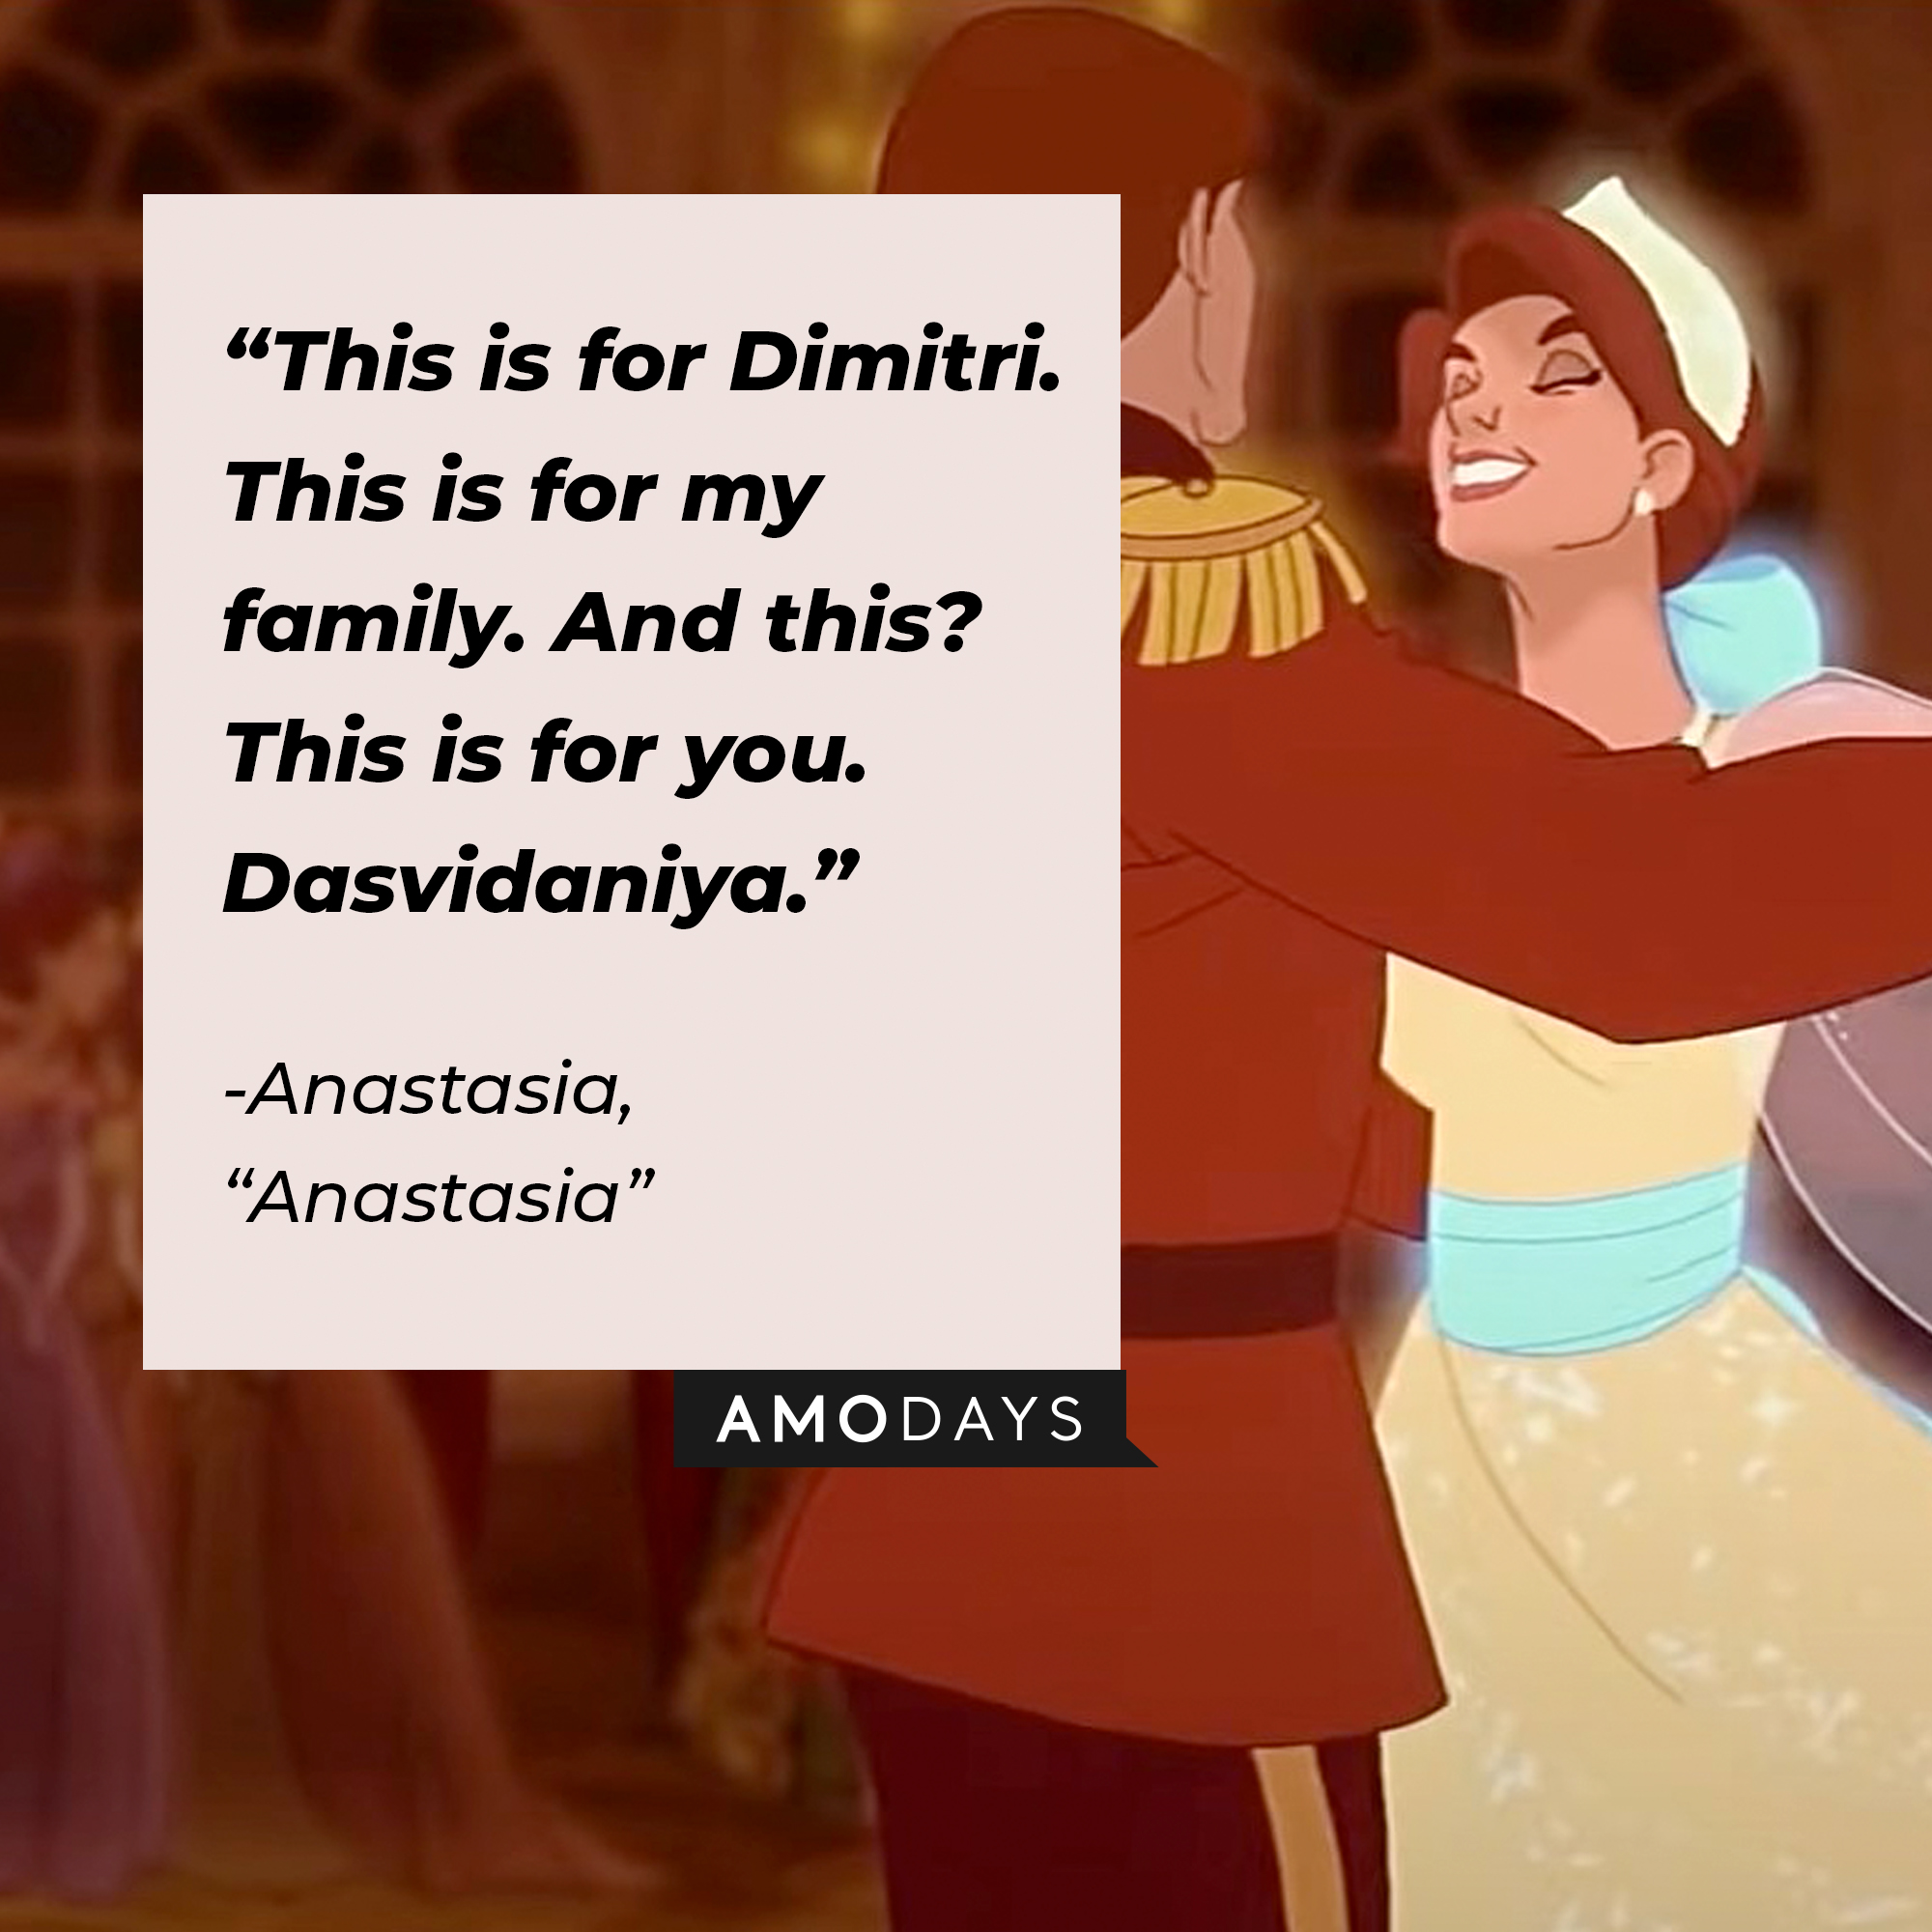 Image of Anastasia with the quote: "This is for Dimitri. This is for my family. And this? This is for you. Dasvidaniya." | Source: Youtube.com/20thCenturyStudios